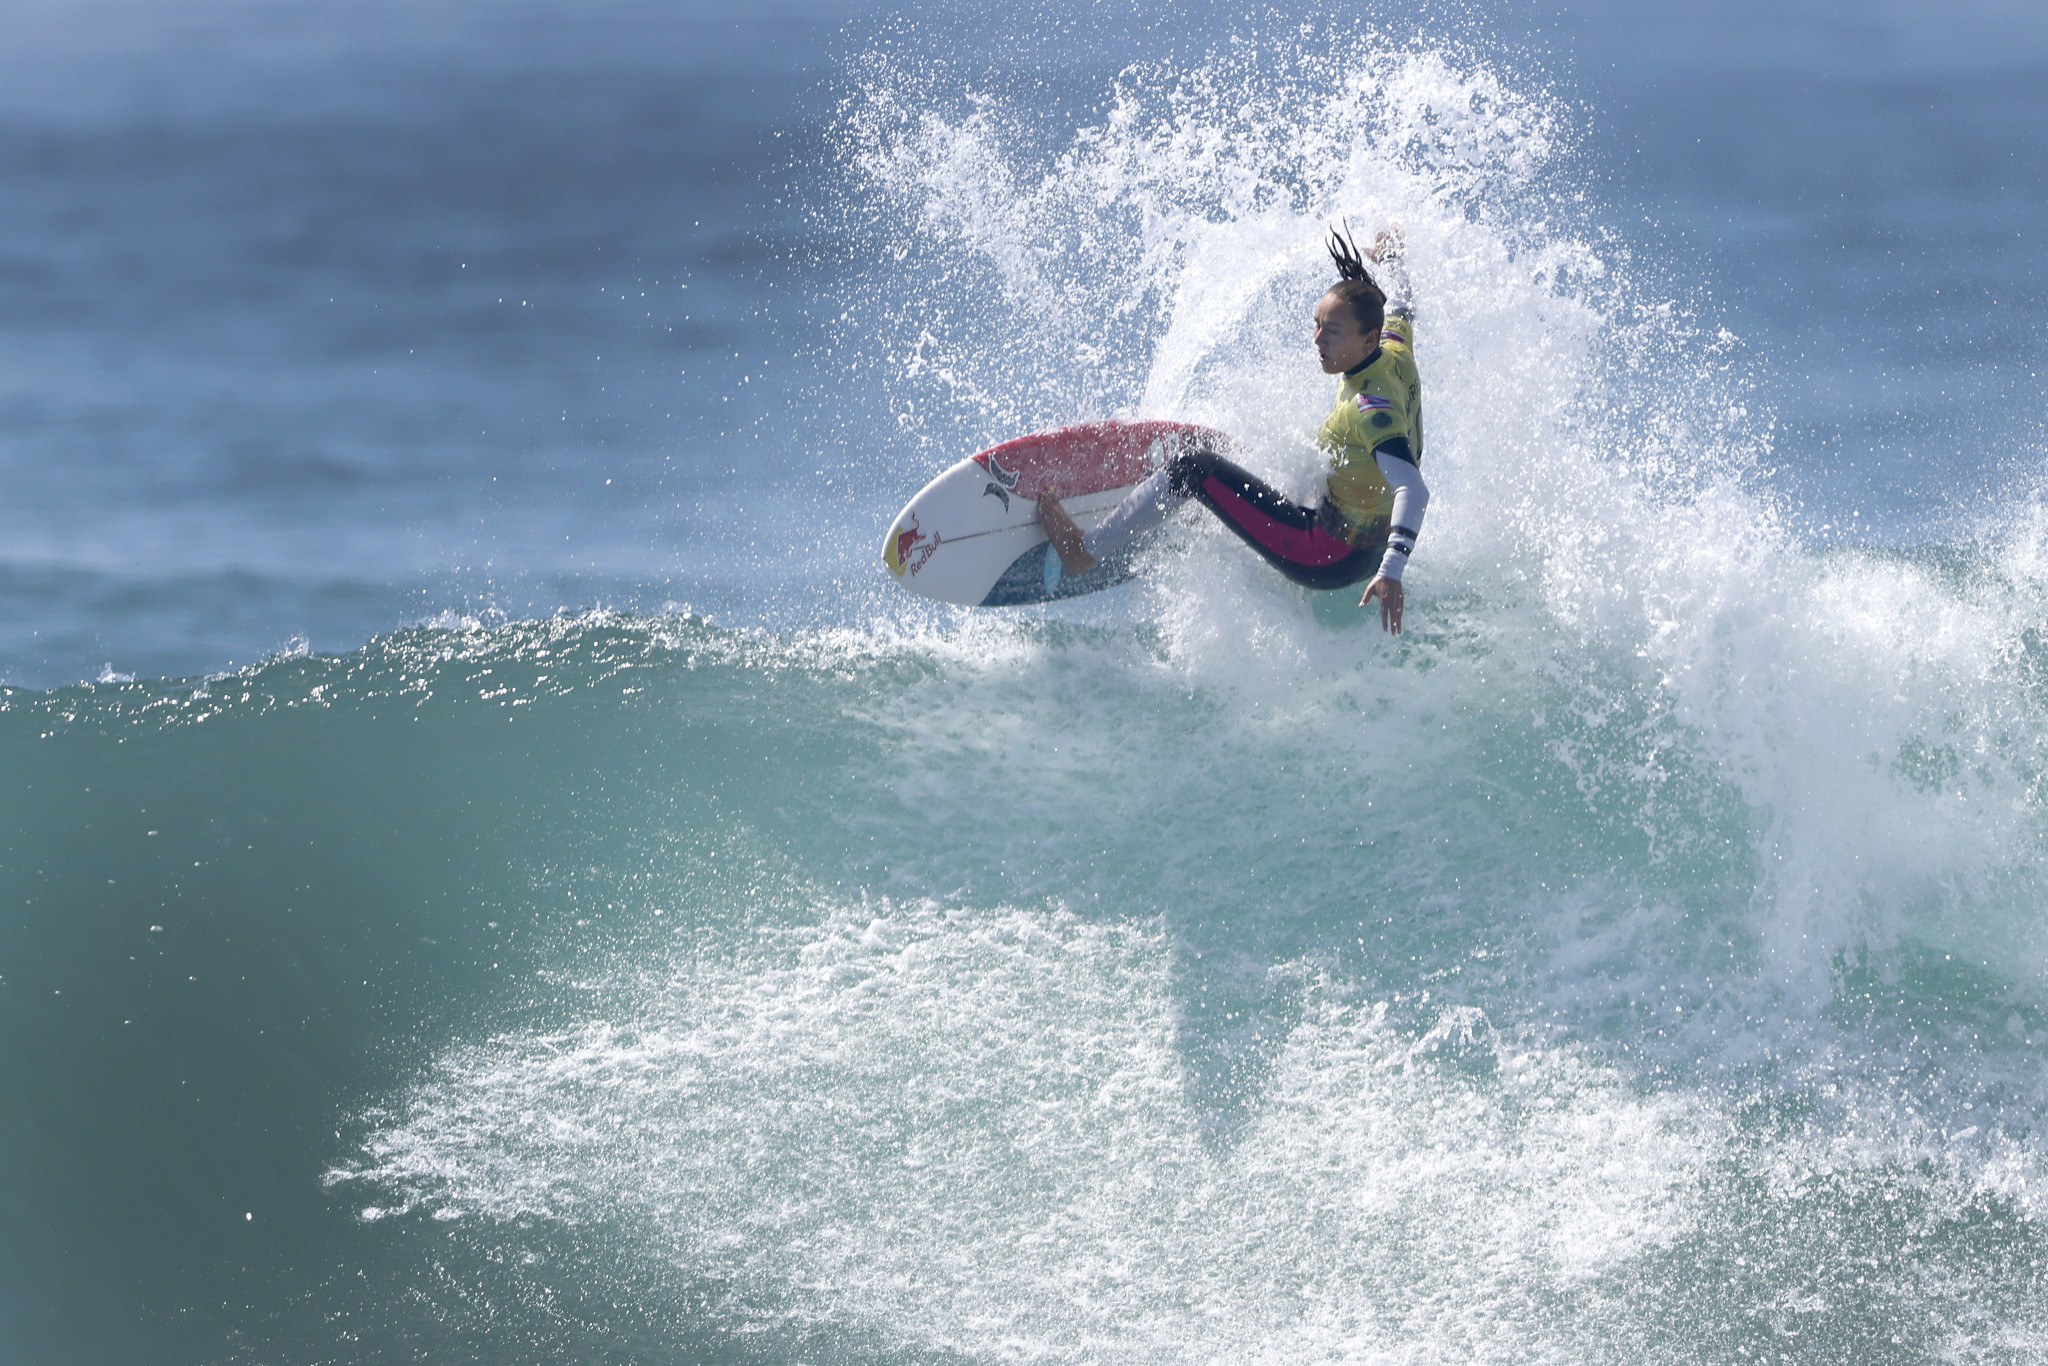 Defending champion Moore defeats Spencer to reach last eight of World Surf League event at Bells Beach